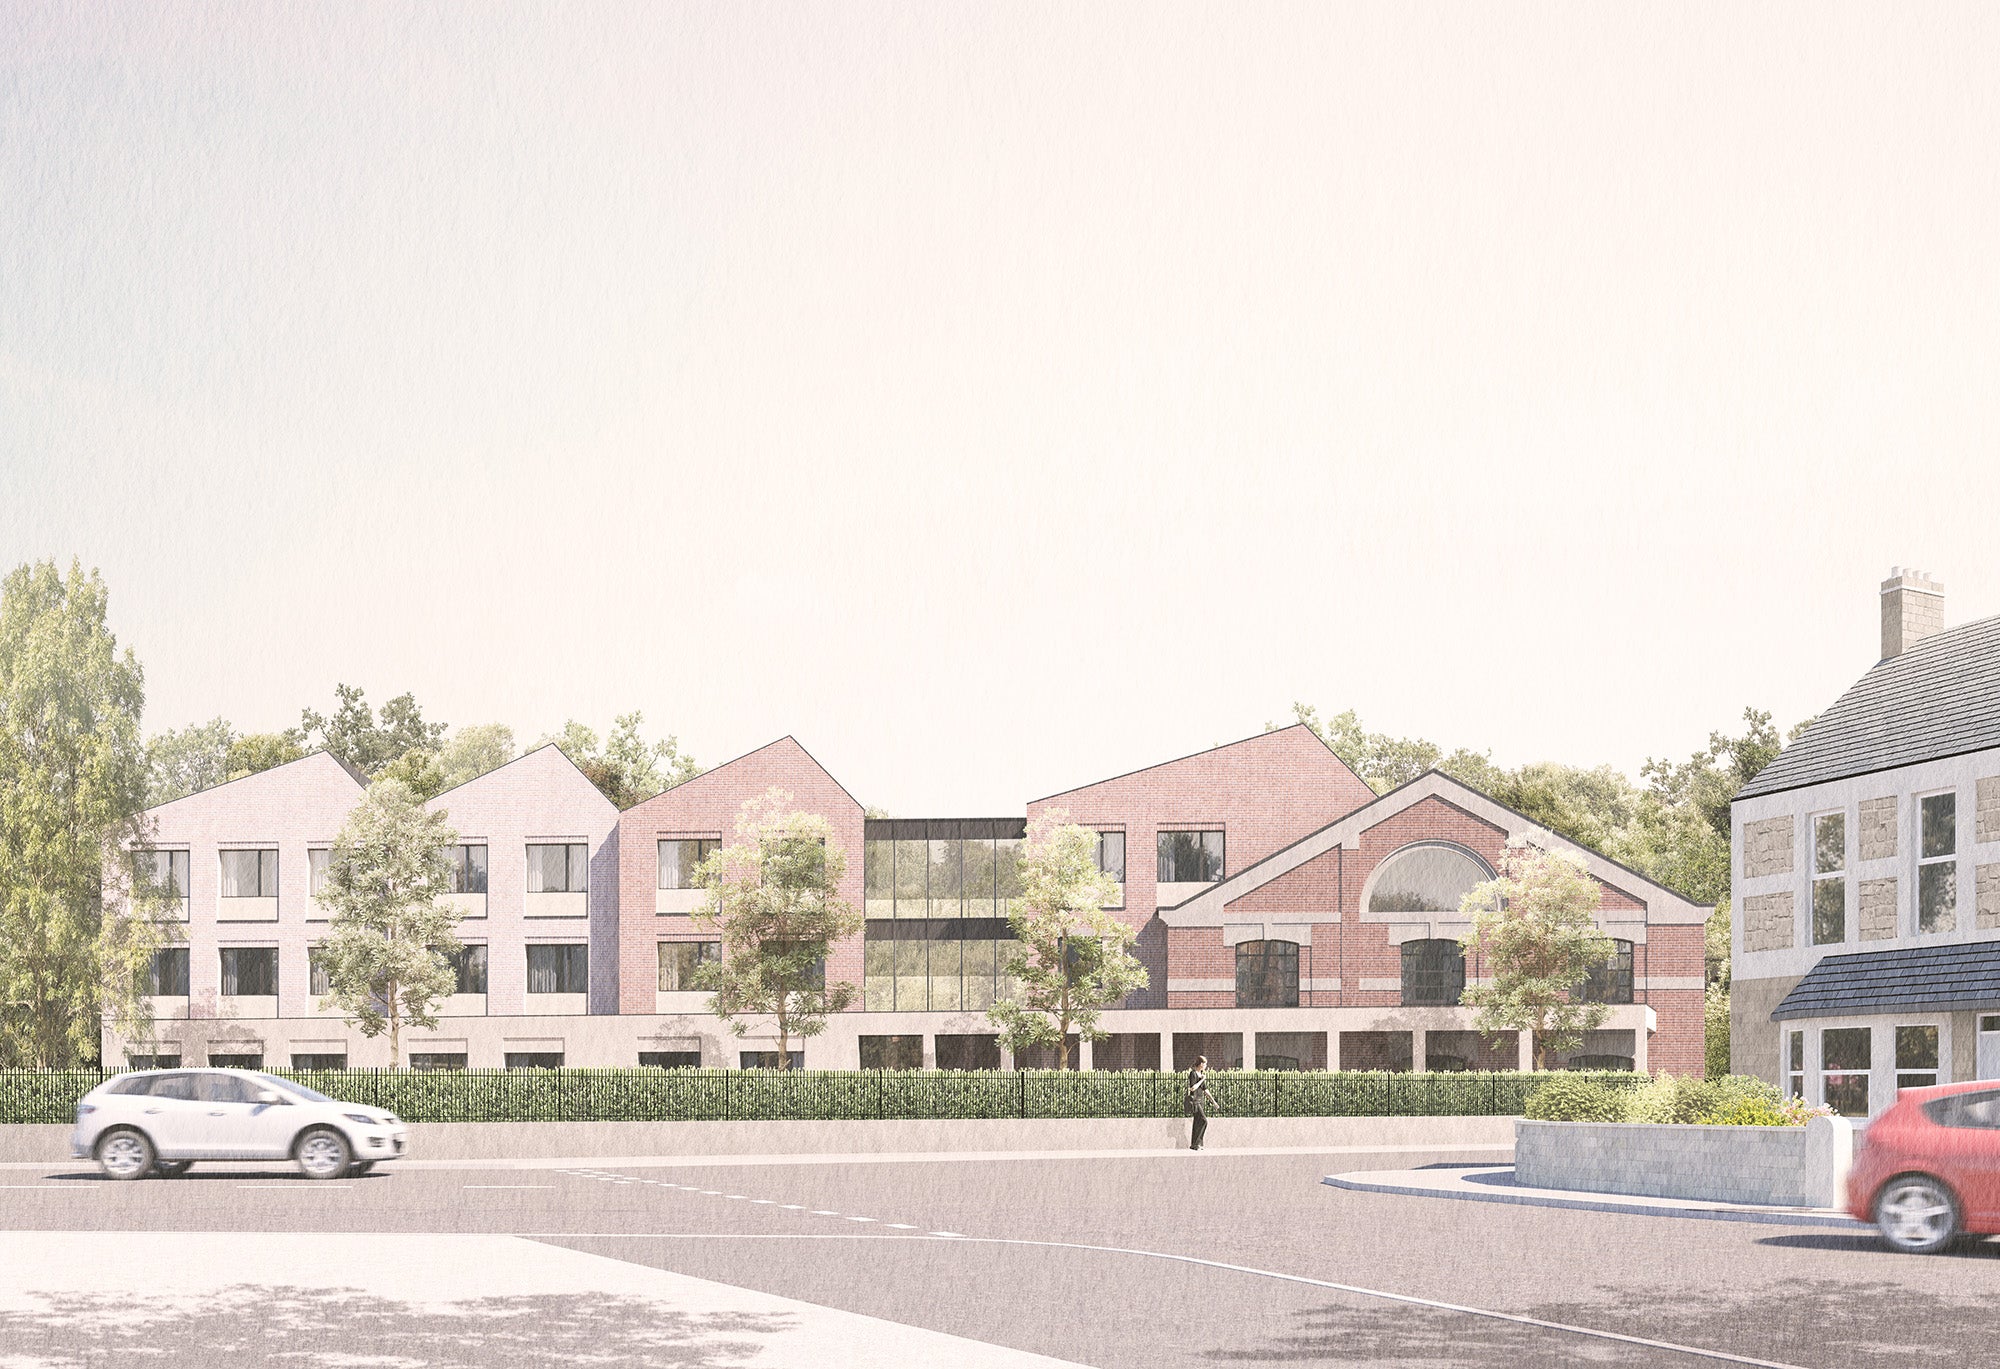 CGI for a care home development site drawn up by Harris Irwin Associates